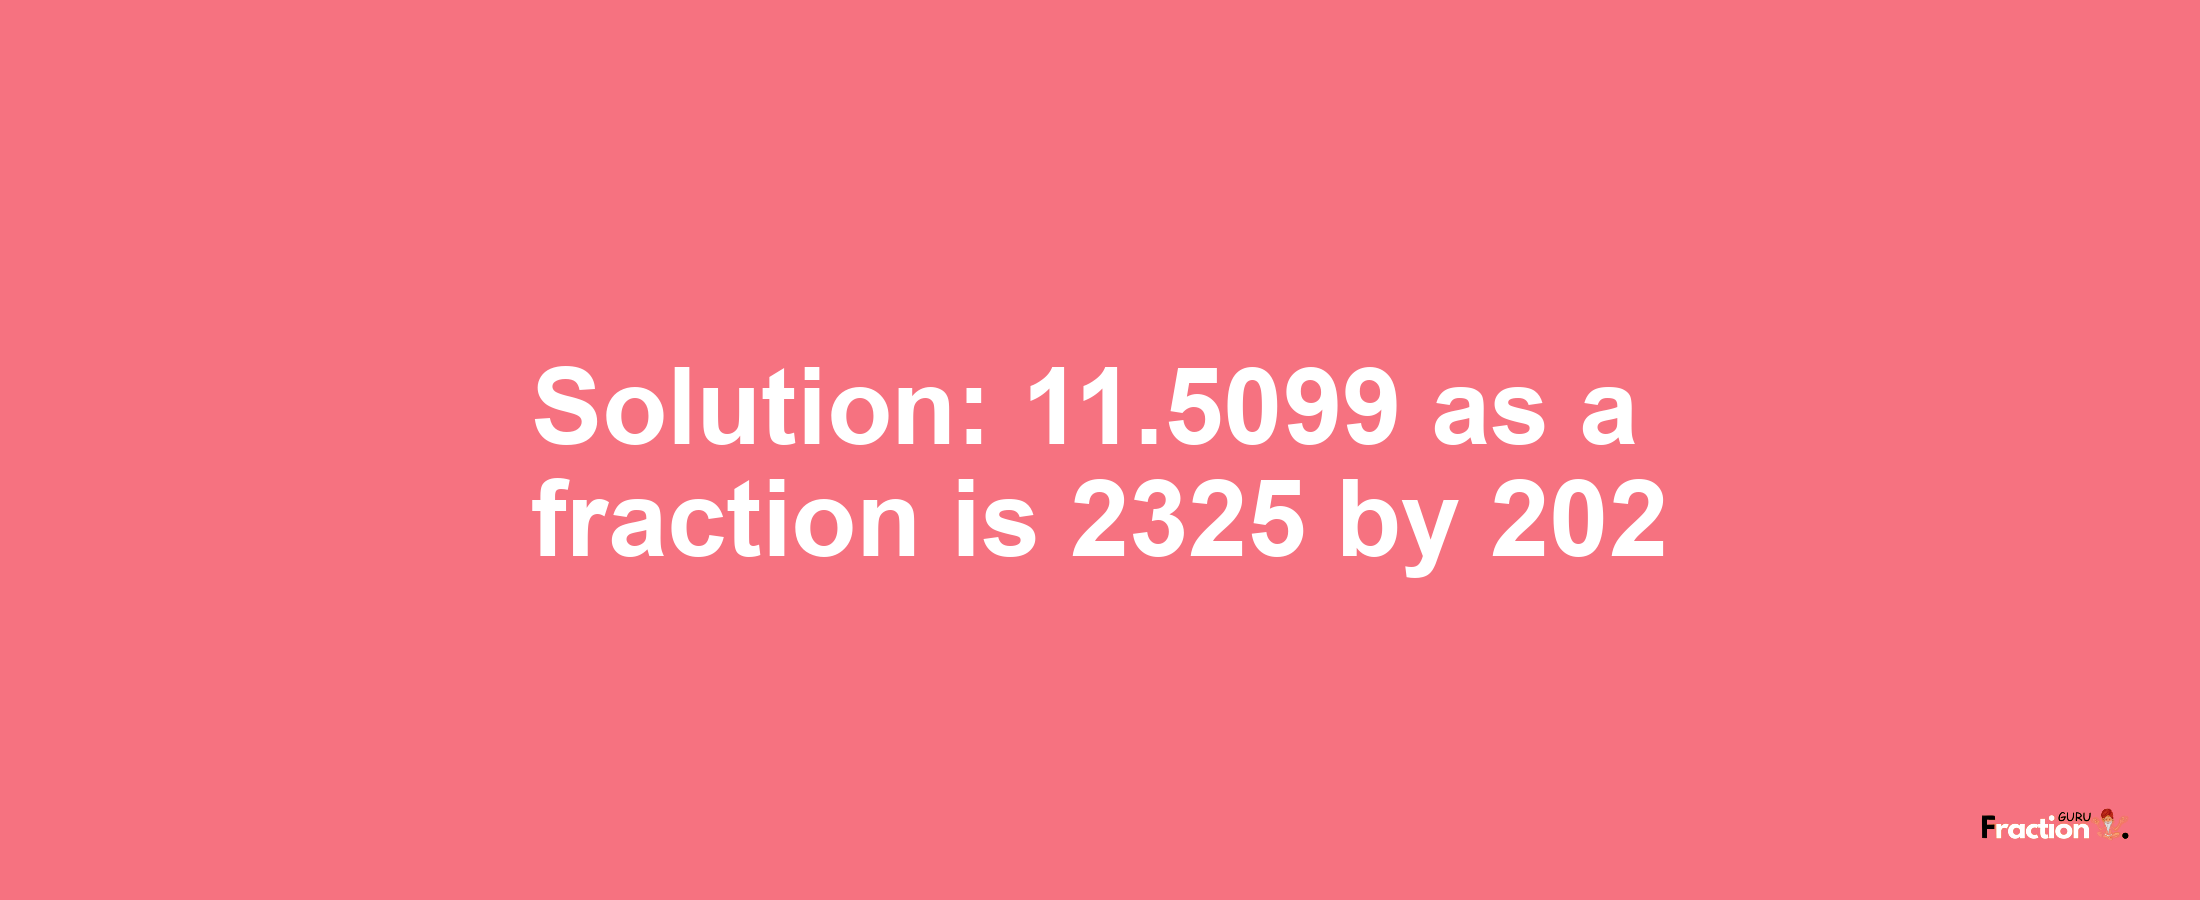 Solution:11.5099 as a fraction is 2325/202